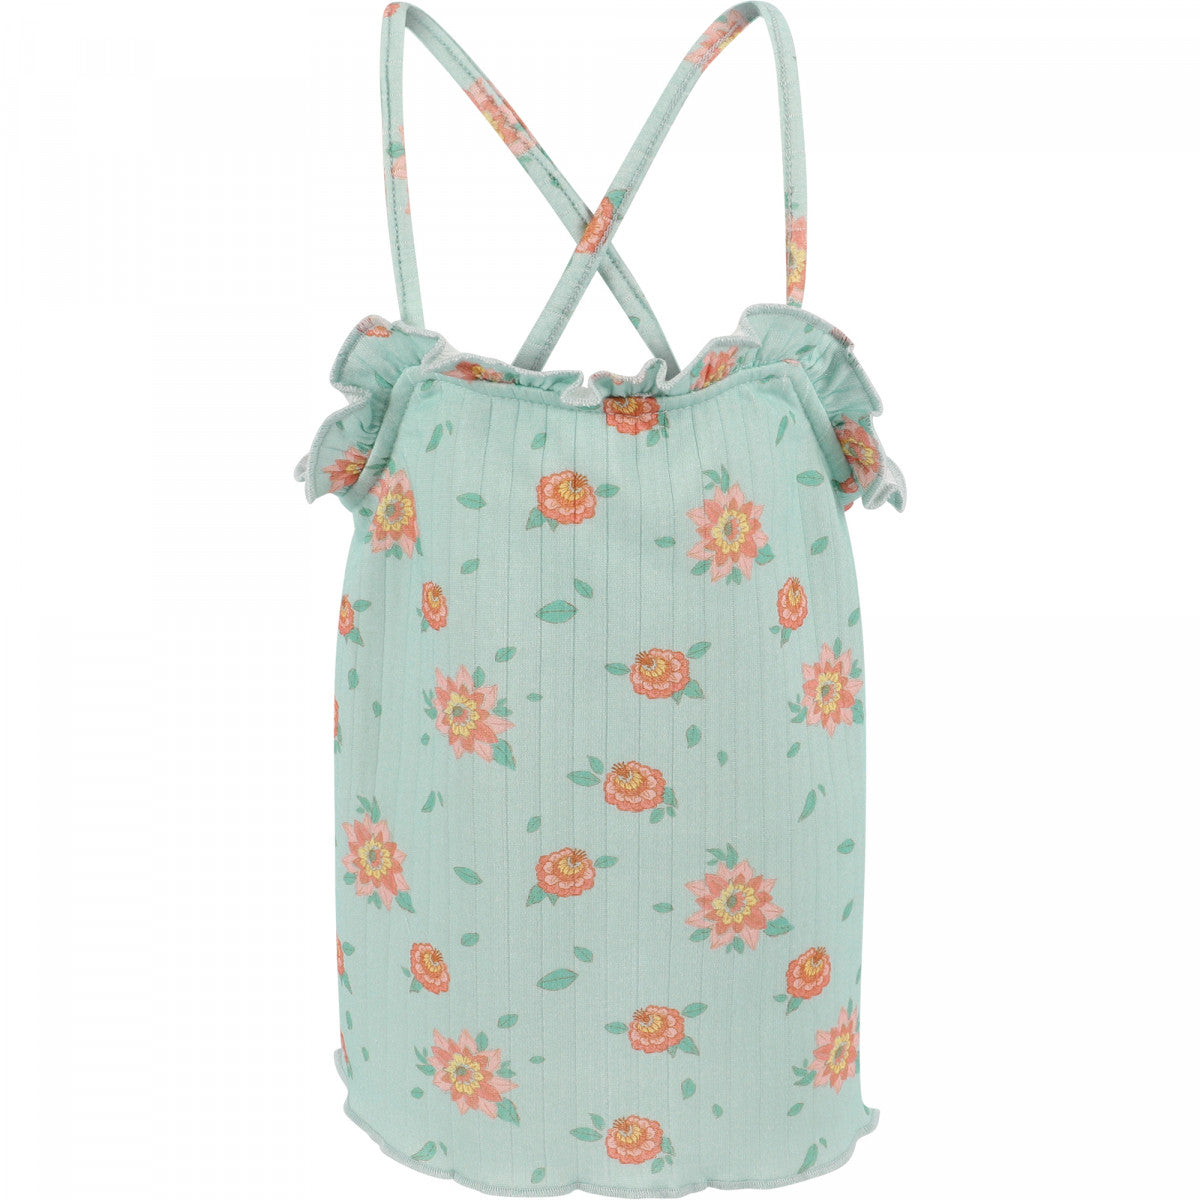 [3*/4y] Louise Misha Ribbed Floral Print Open Back Top - Turqoise  Flowers